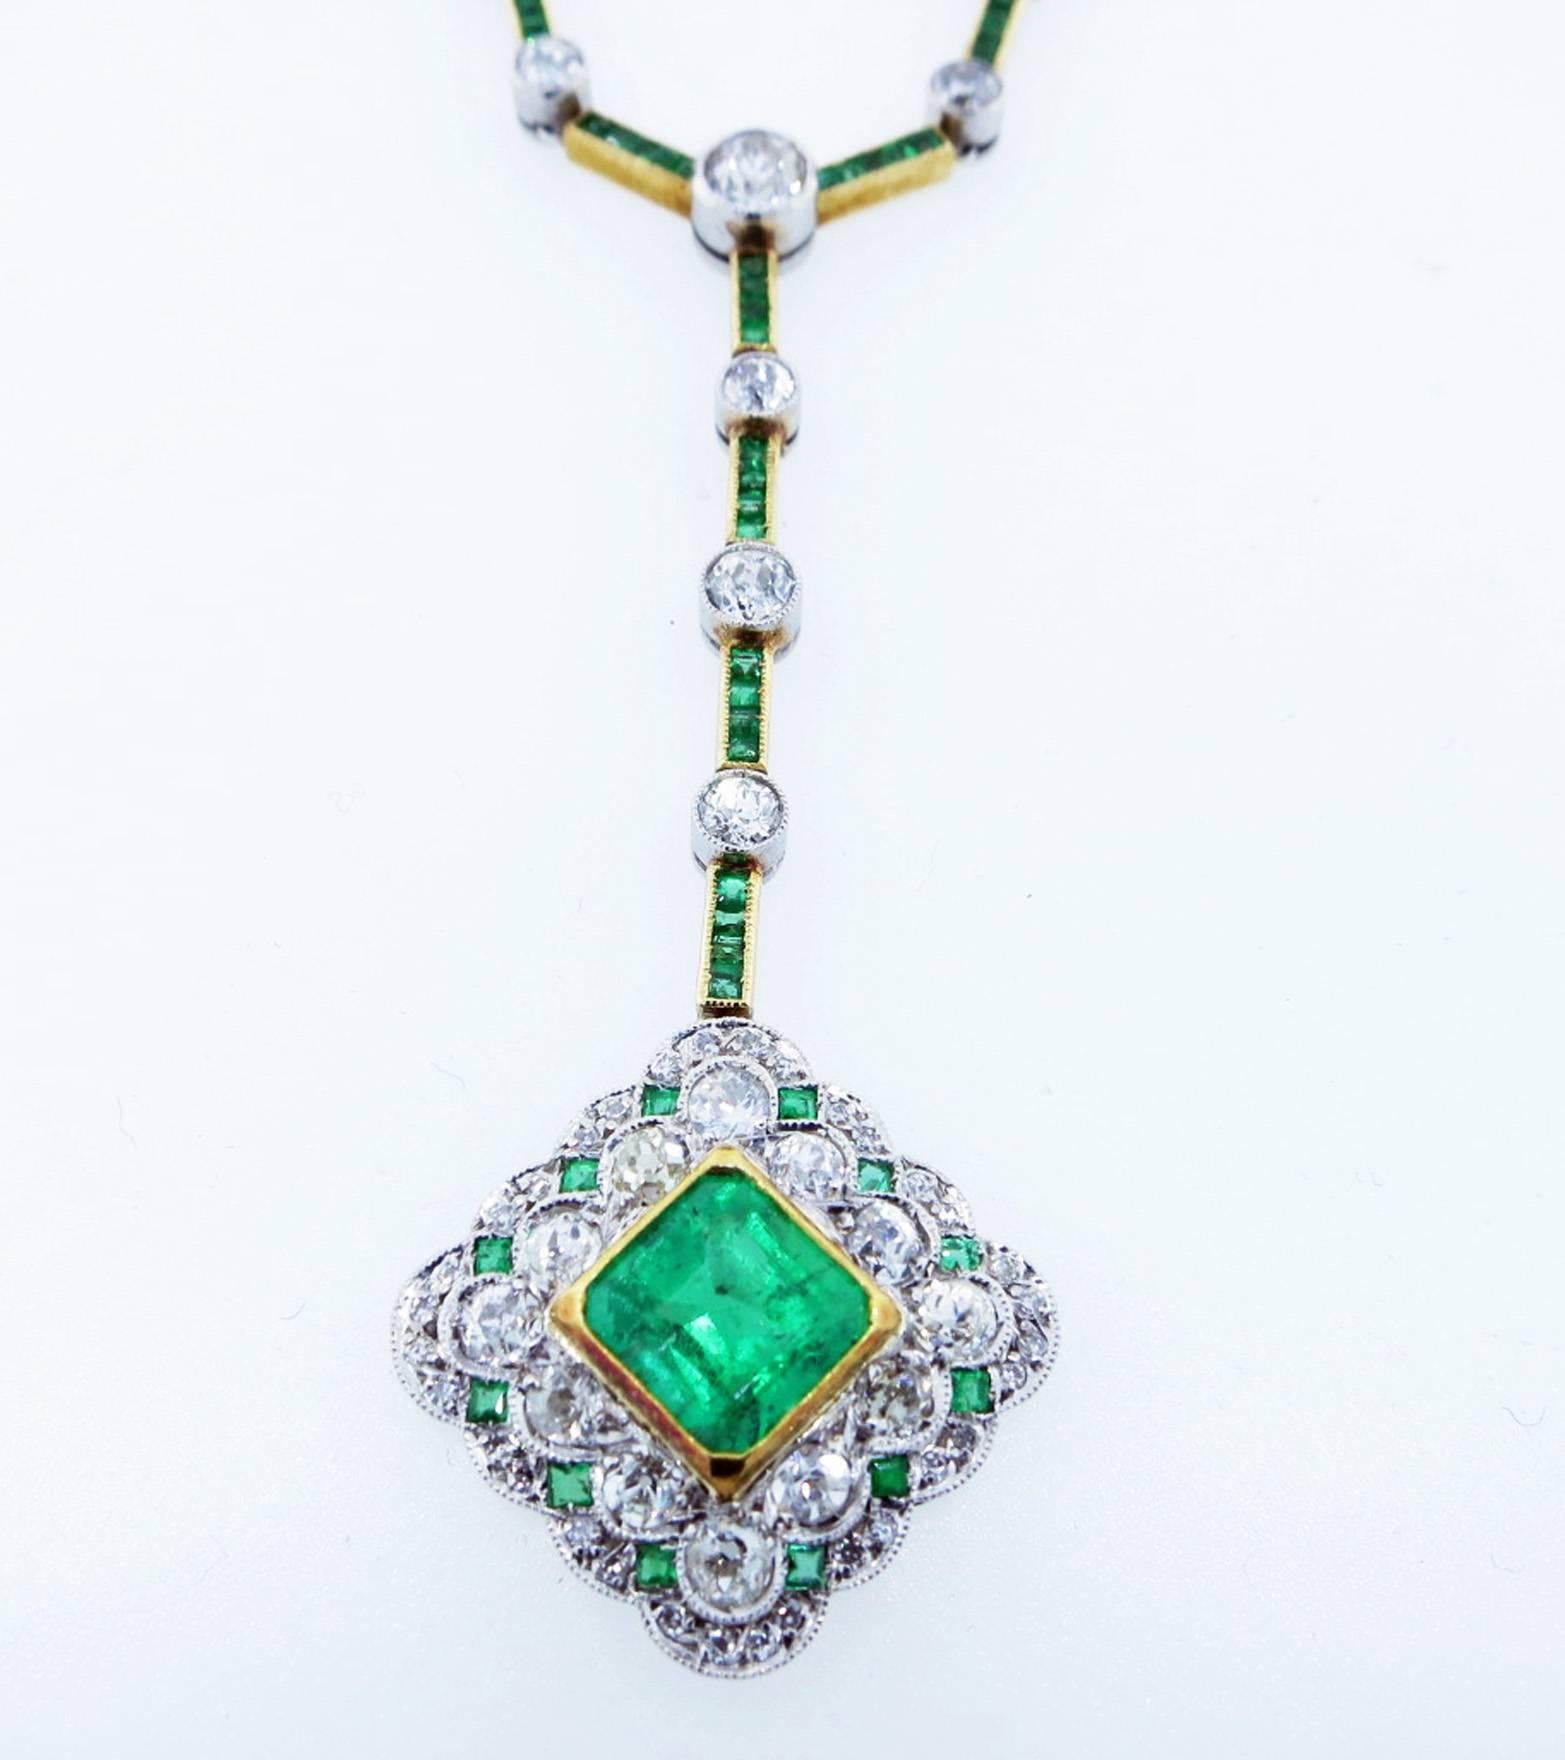 Beautiful antique natural emerald drop necklace circa 1910. The center is bezel set in 18kt. yellow gold with an emerald cut emerald weighing approx 1.25cts. intricately surrounded in a scalloped design mount with mill-grained bead set old European